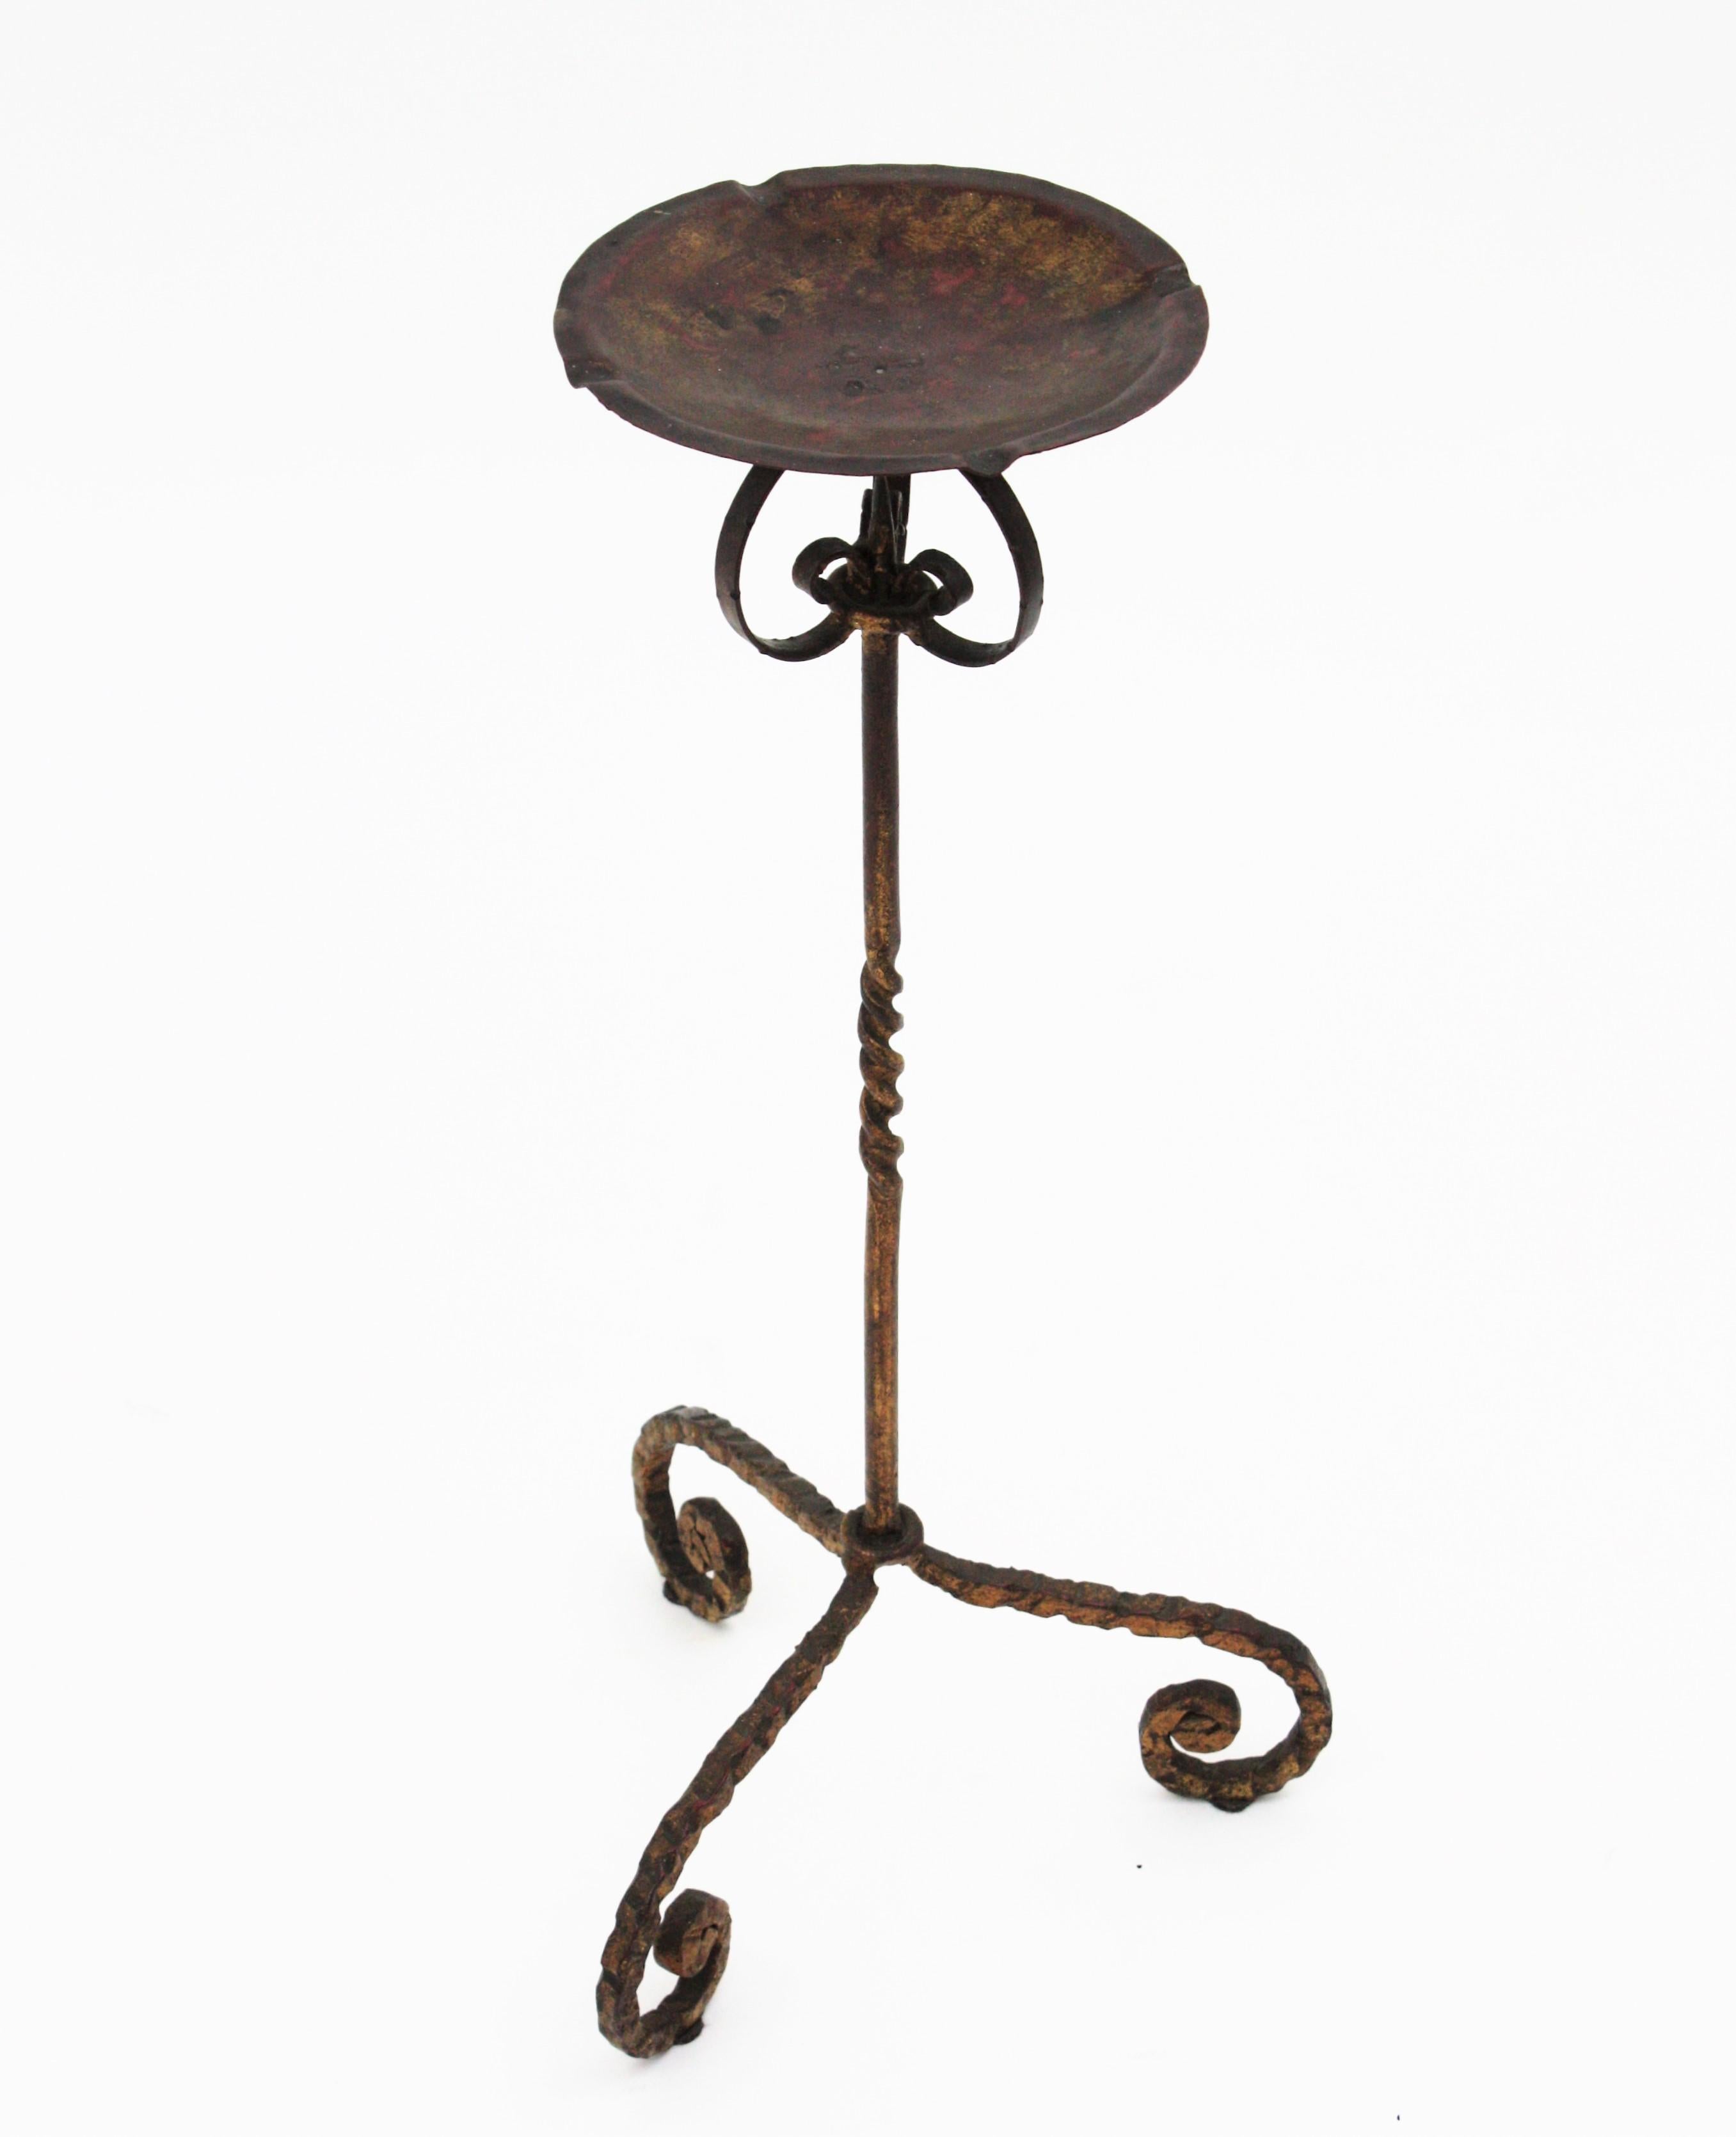 Gothic Revival Spanish Drinks Table / Side Table / Floor Ashtray, Wrought Iron, 1940s For Sale